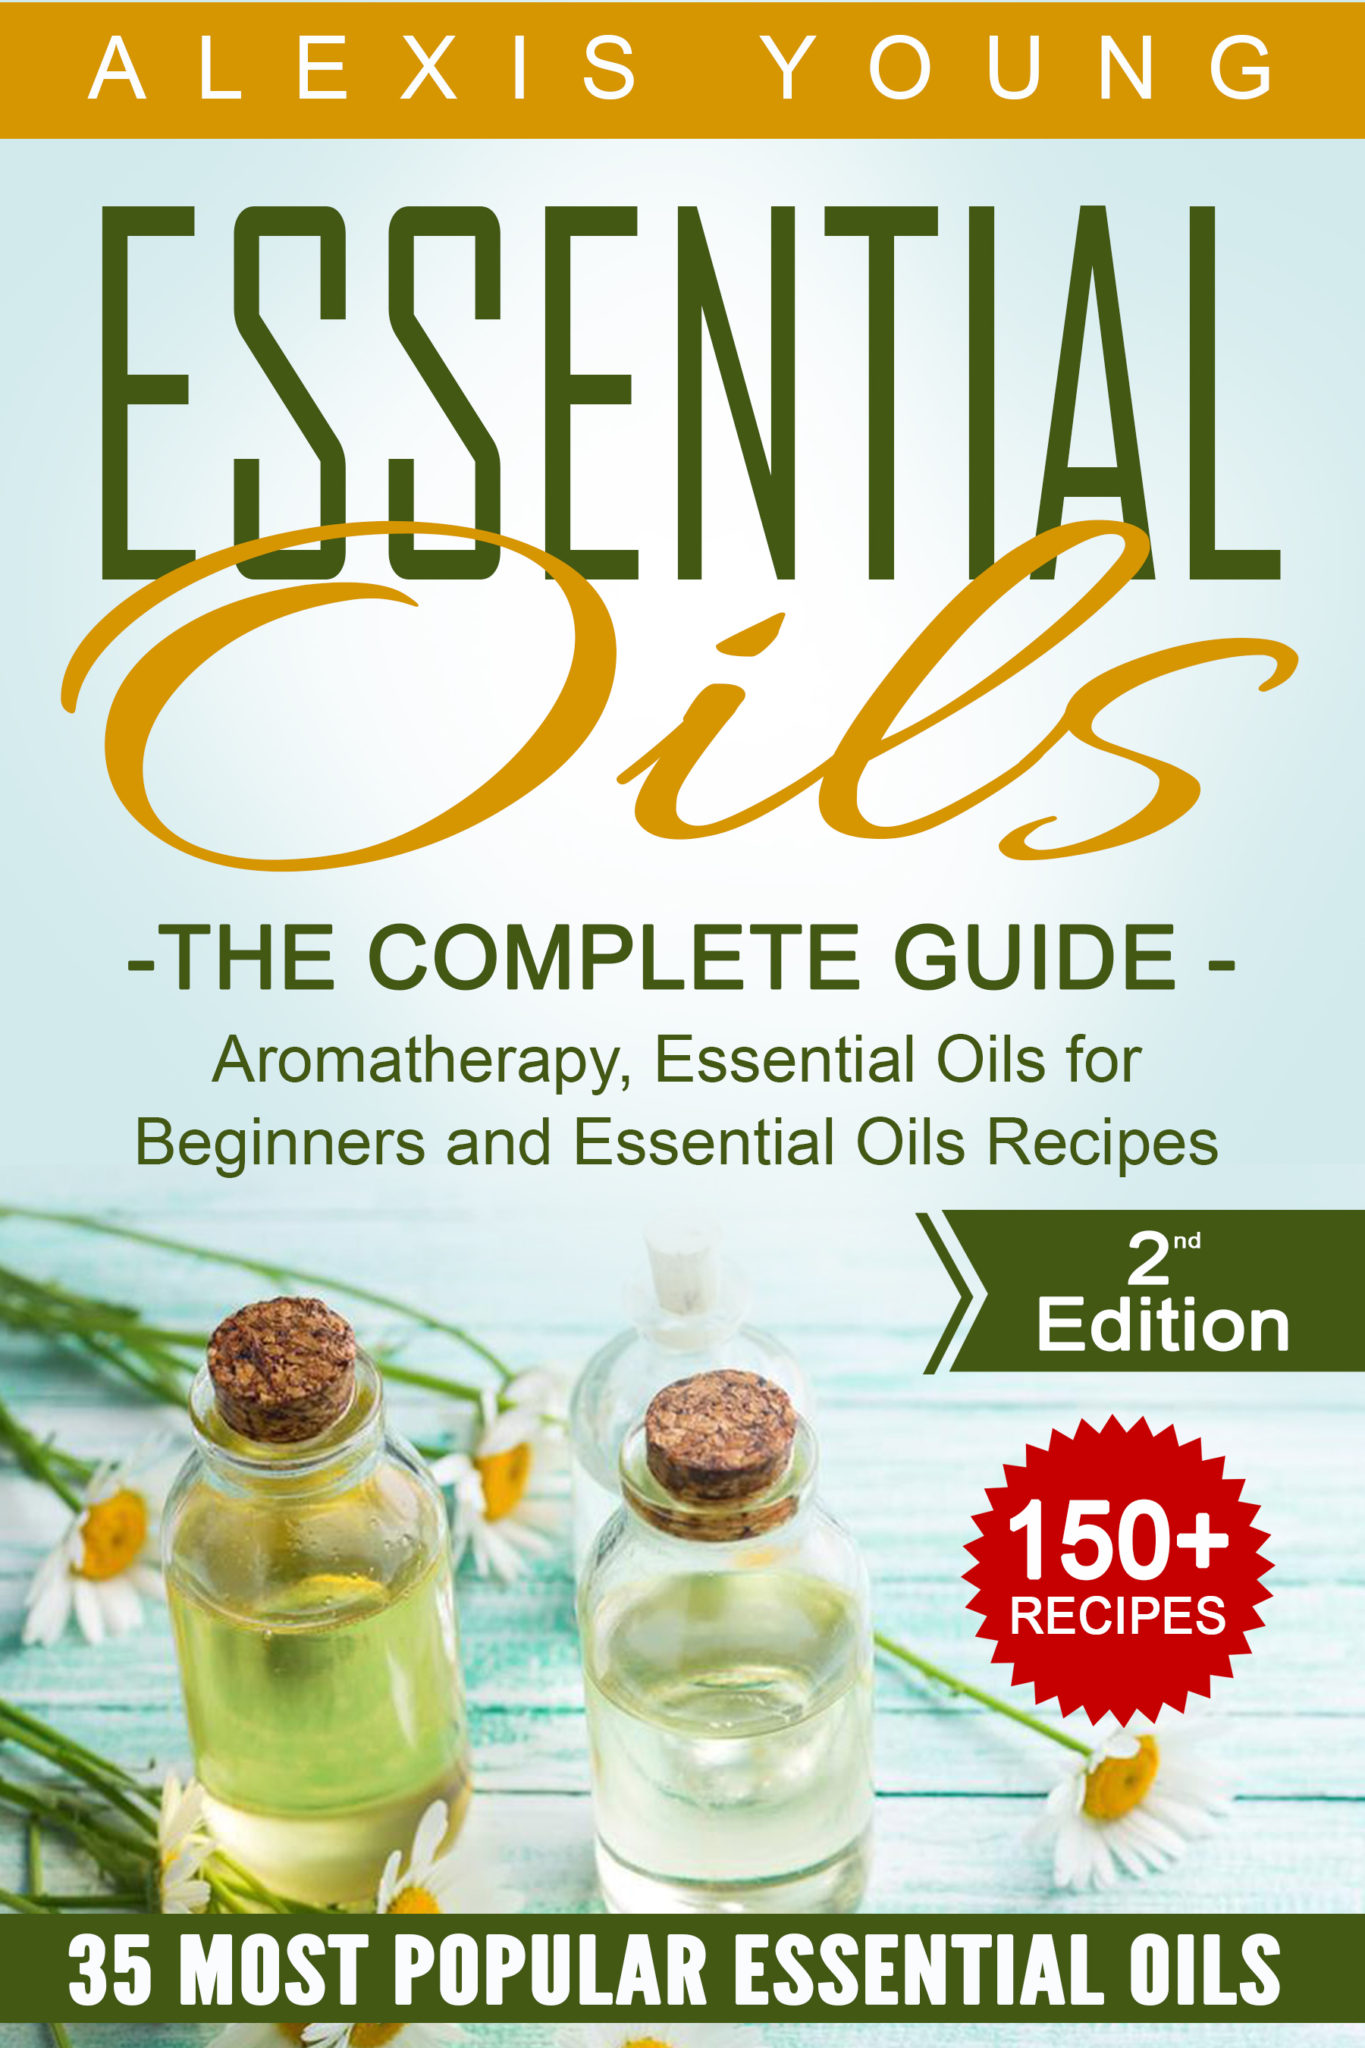 FREE: Essential Oils for Beginners: The Complete Guide: Over 150 Powerful Recipes That Really Works, Aromatherapy, Essential Oils, Carrier Oils (Essential Oils … Essential Oils Recipes, Aromatherapy) by Alexis Young